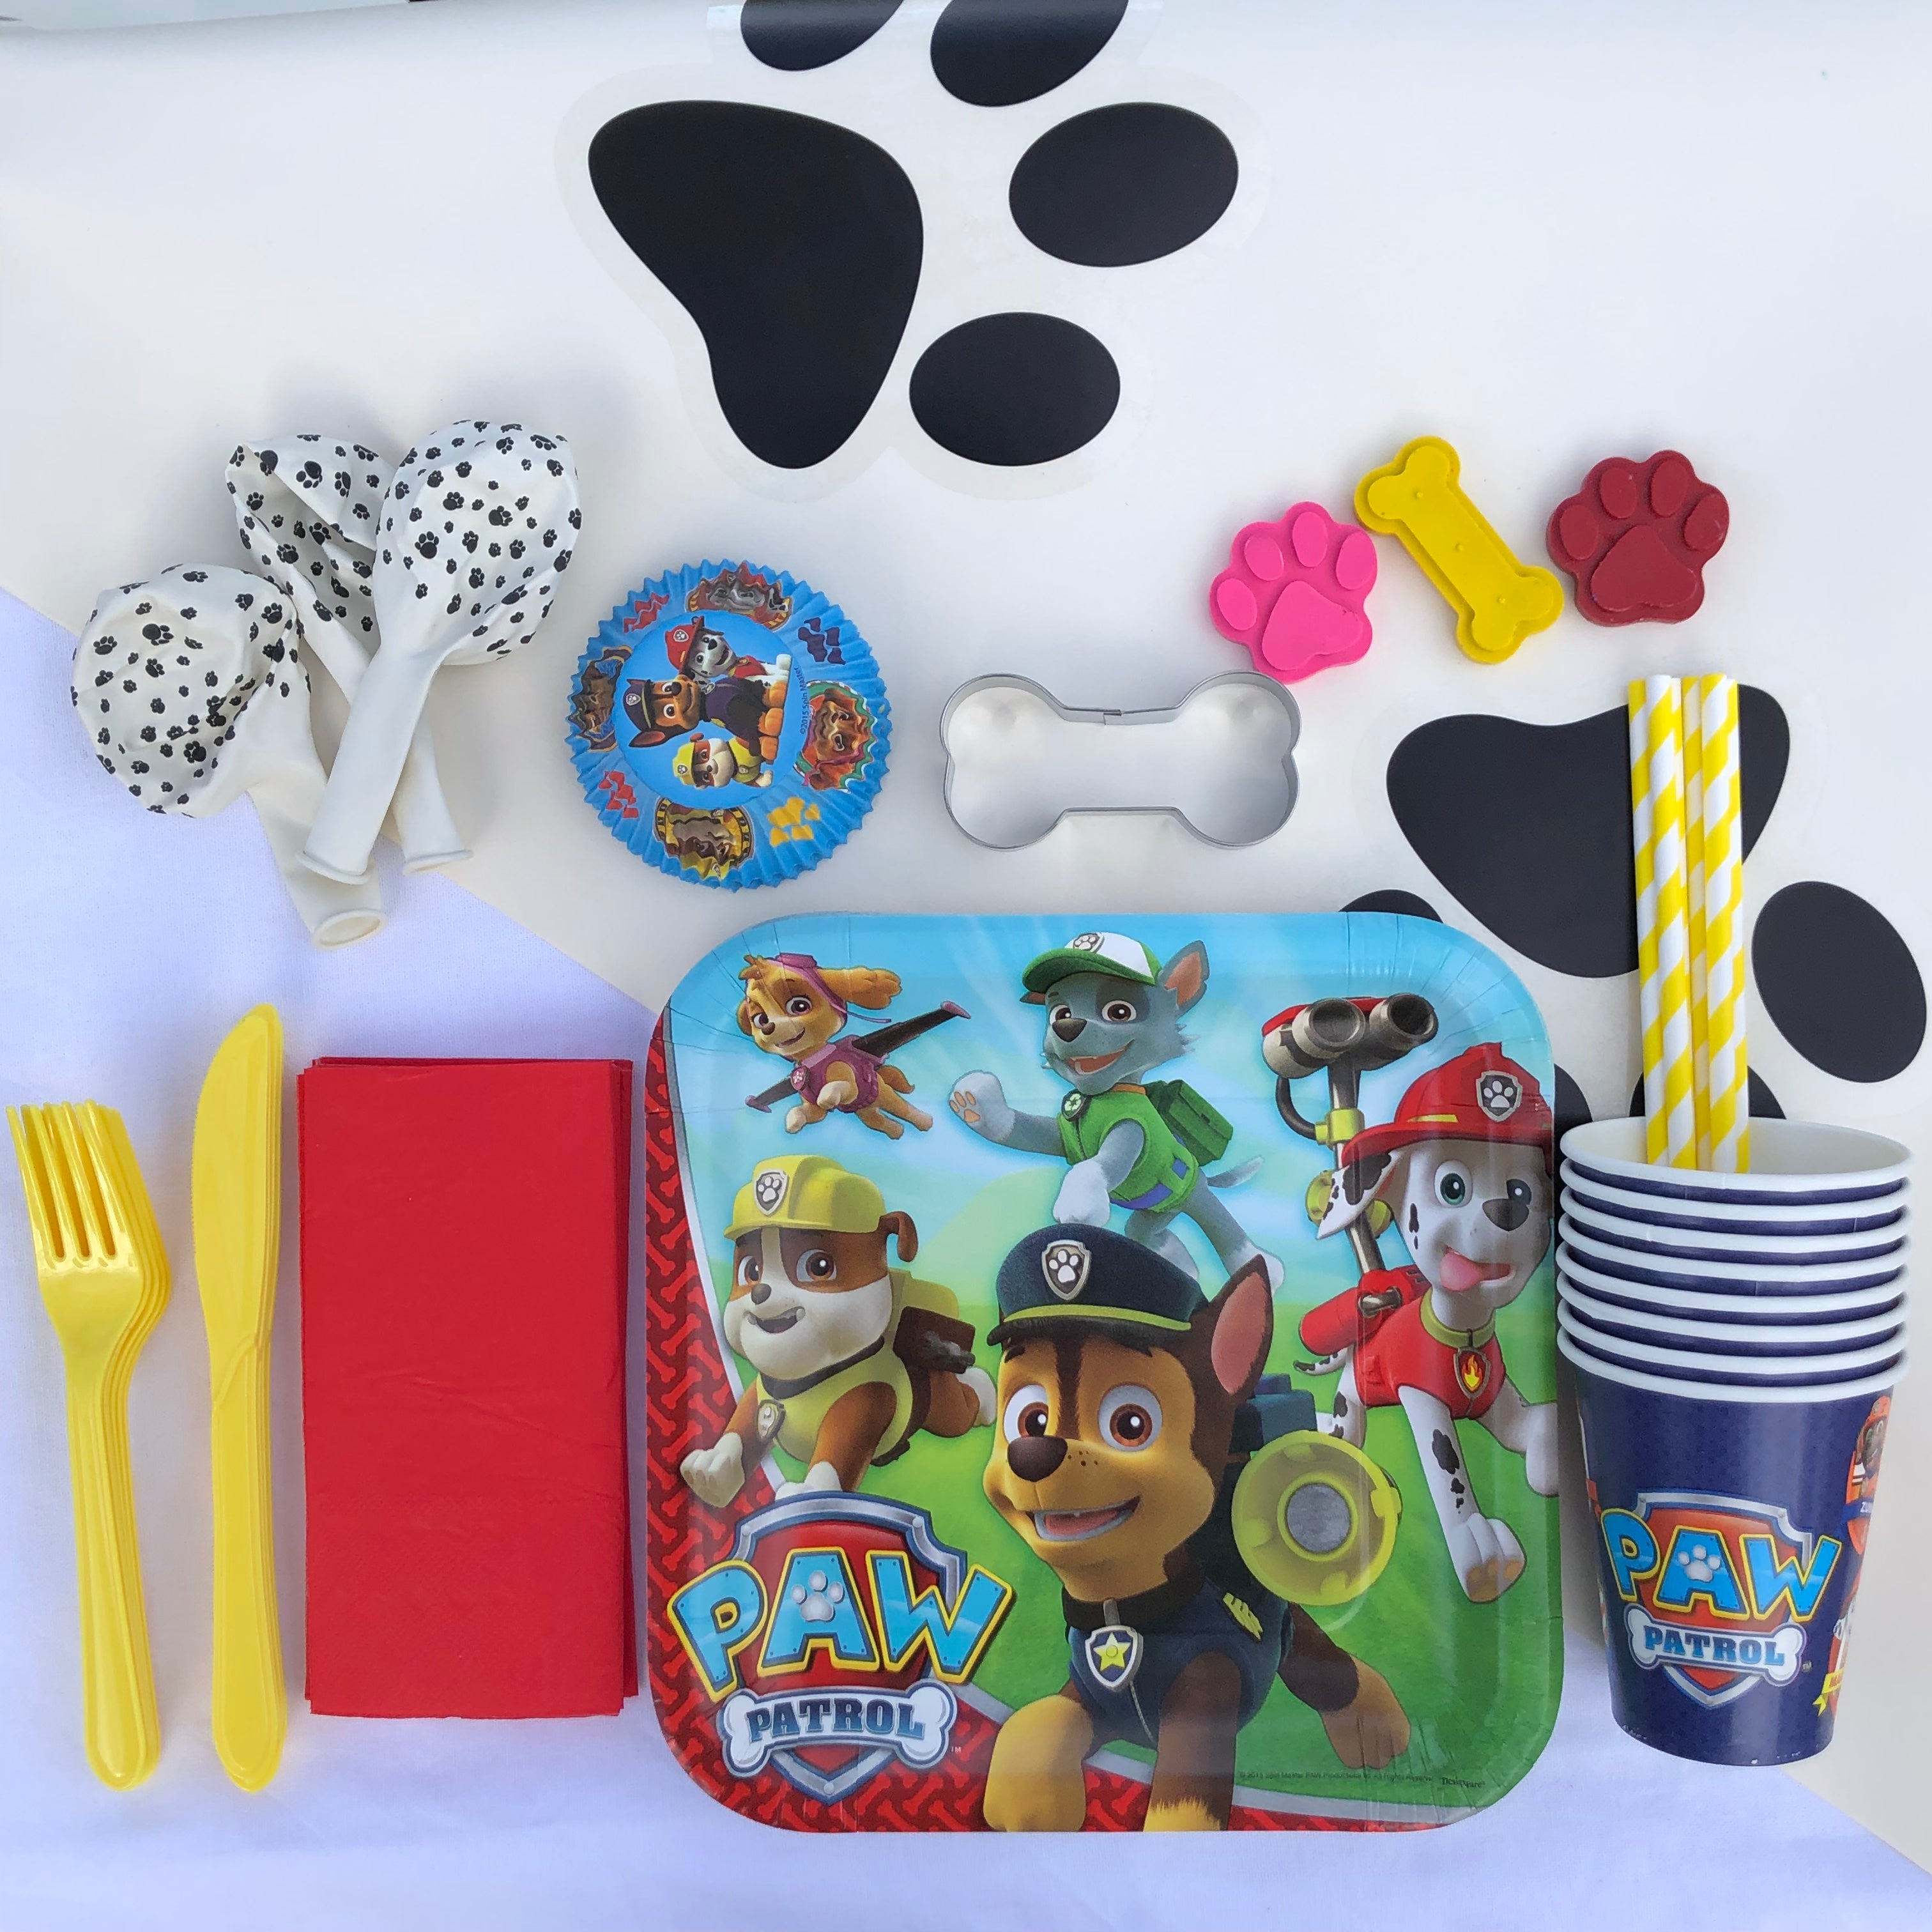 Paw Patrol Lockdown Party Pack with a Cape